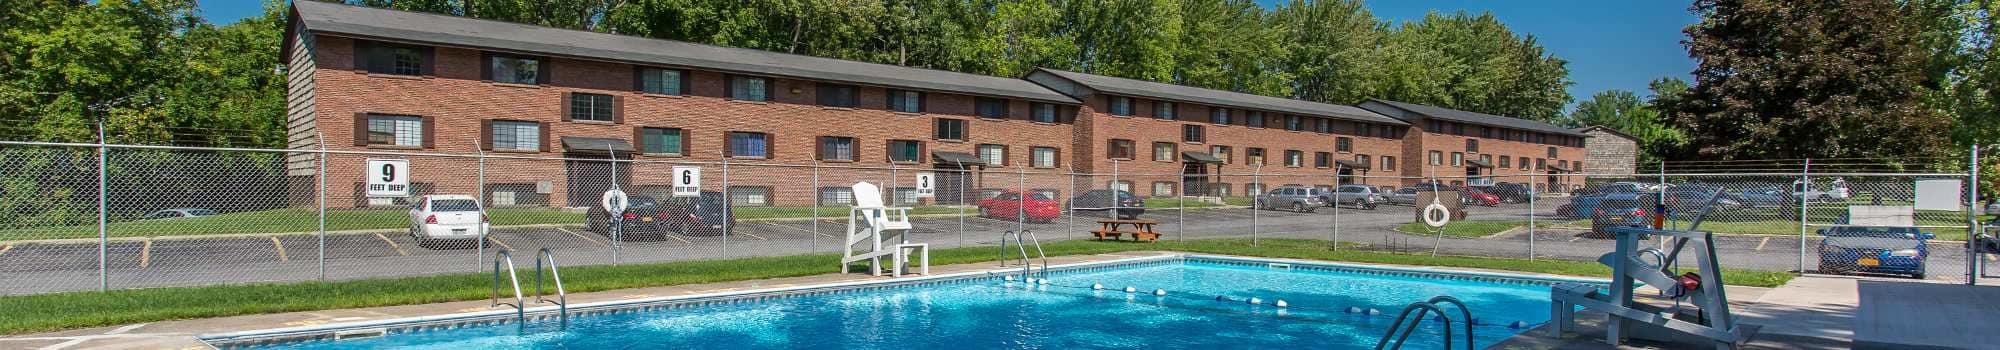 Pet friendly at The Residences at Covered Bridge in Liverpool, New York